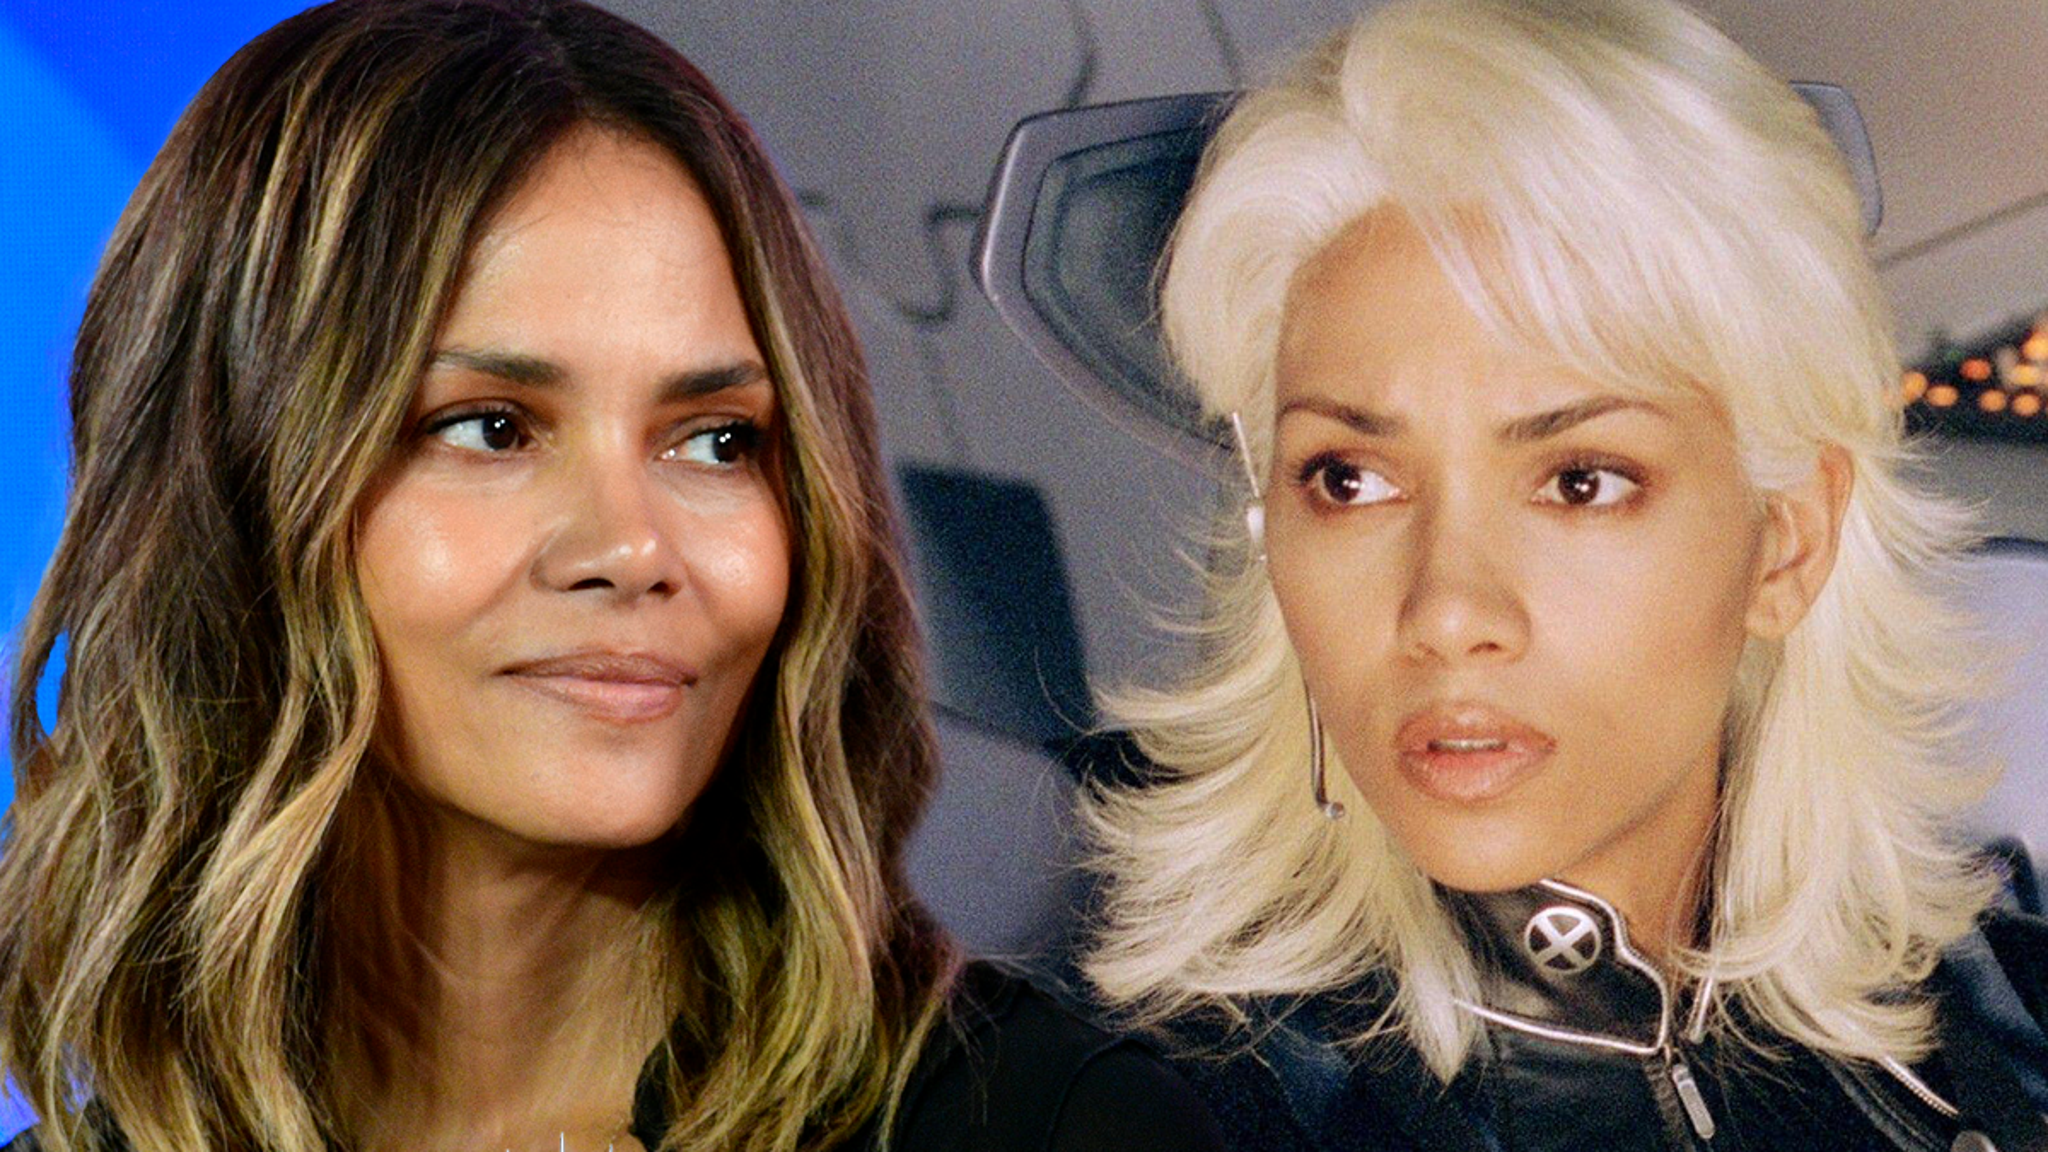 Halle Berry was tricked into starring in X-Men: The Last Stand